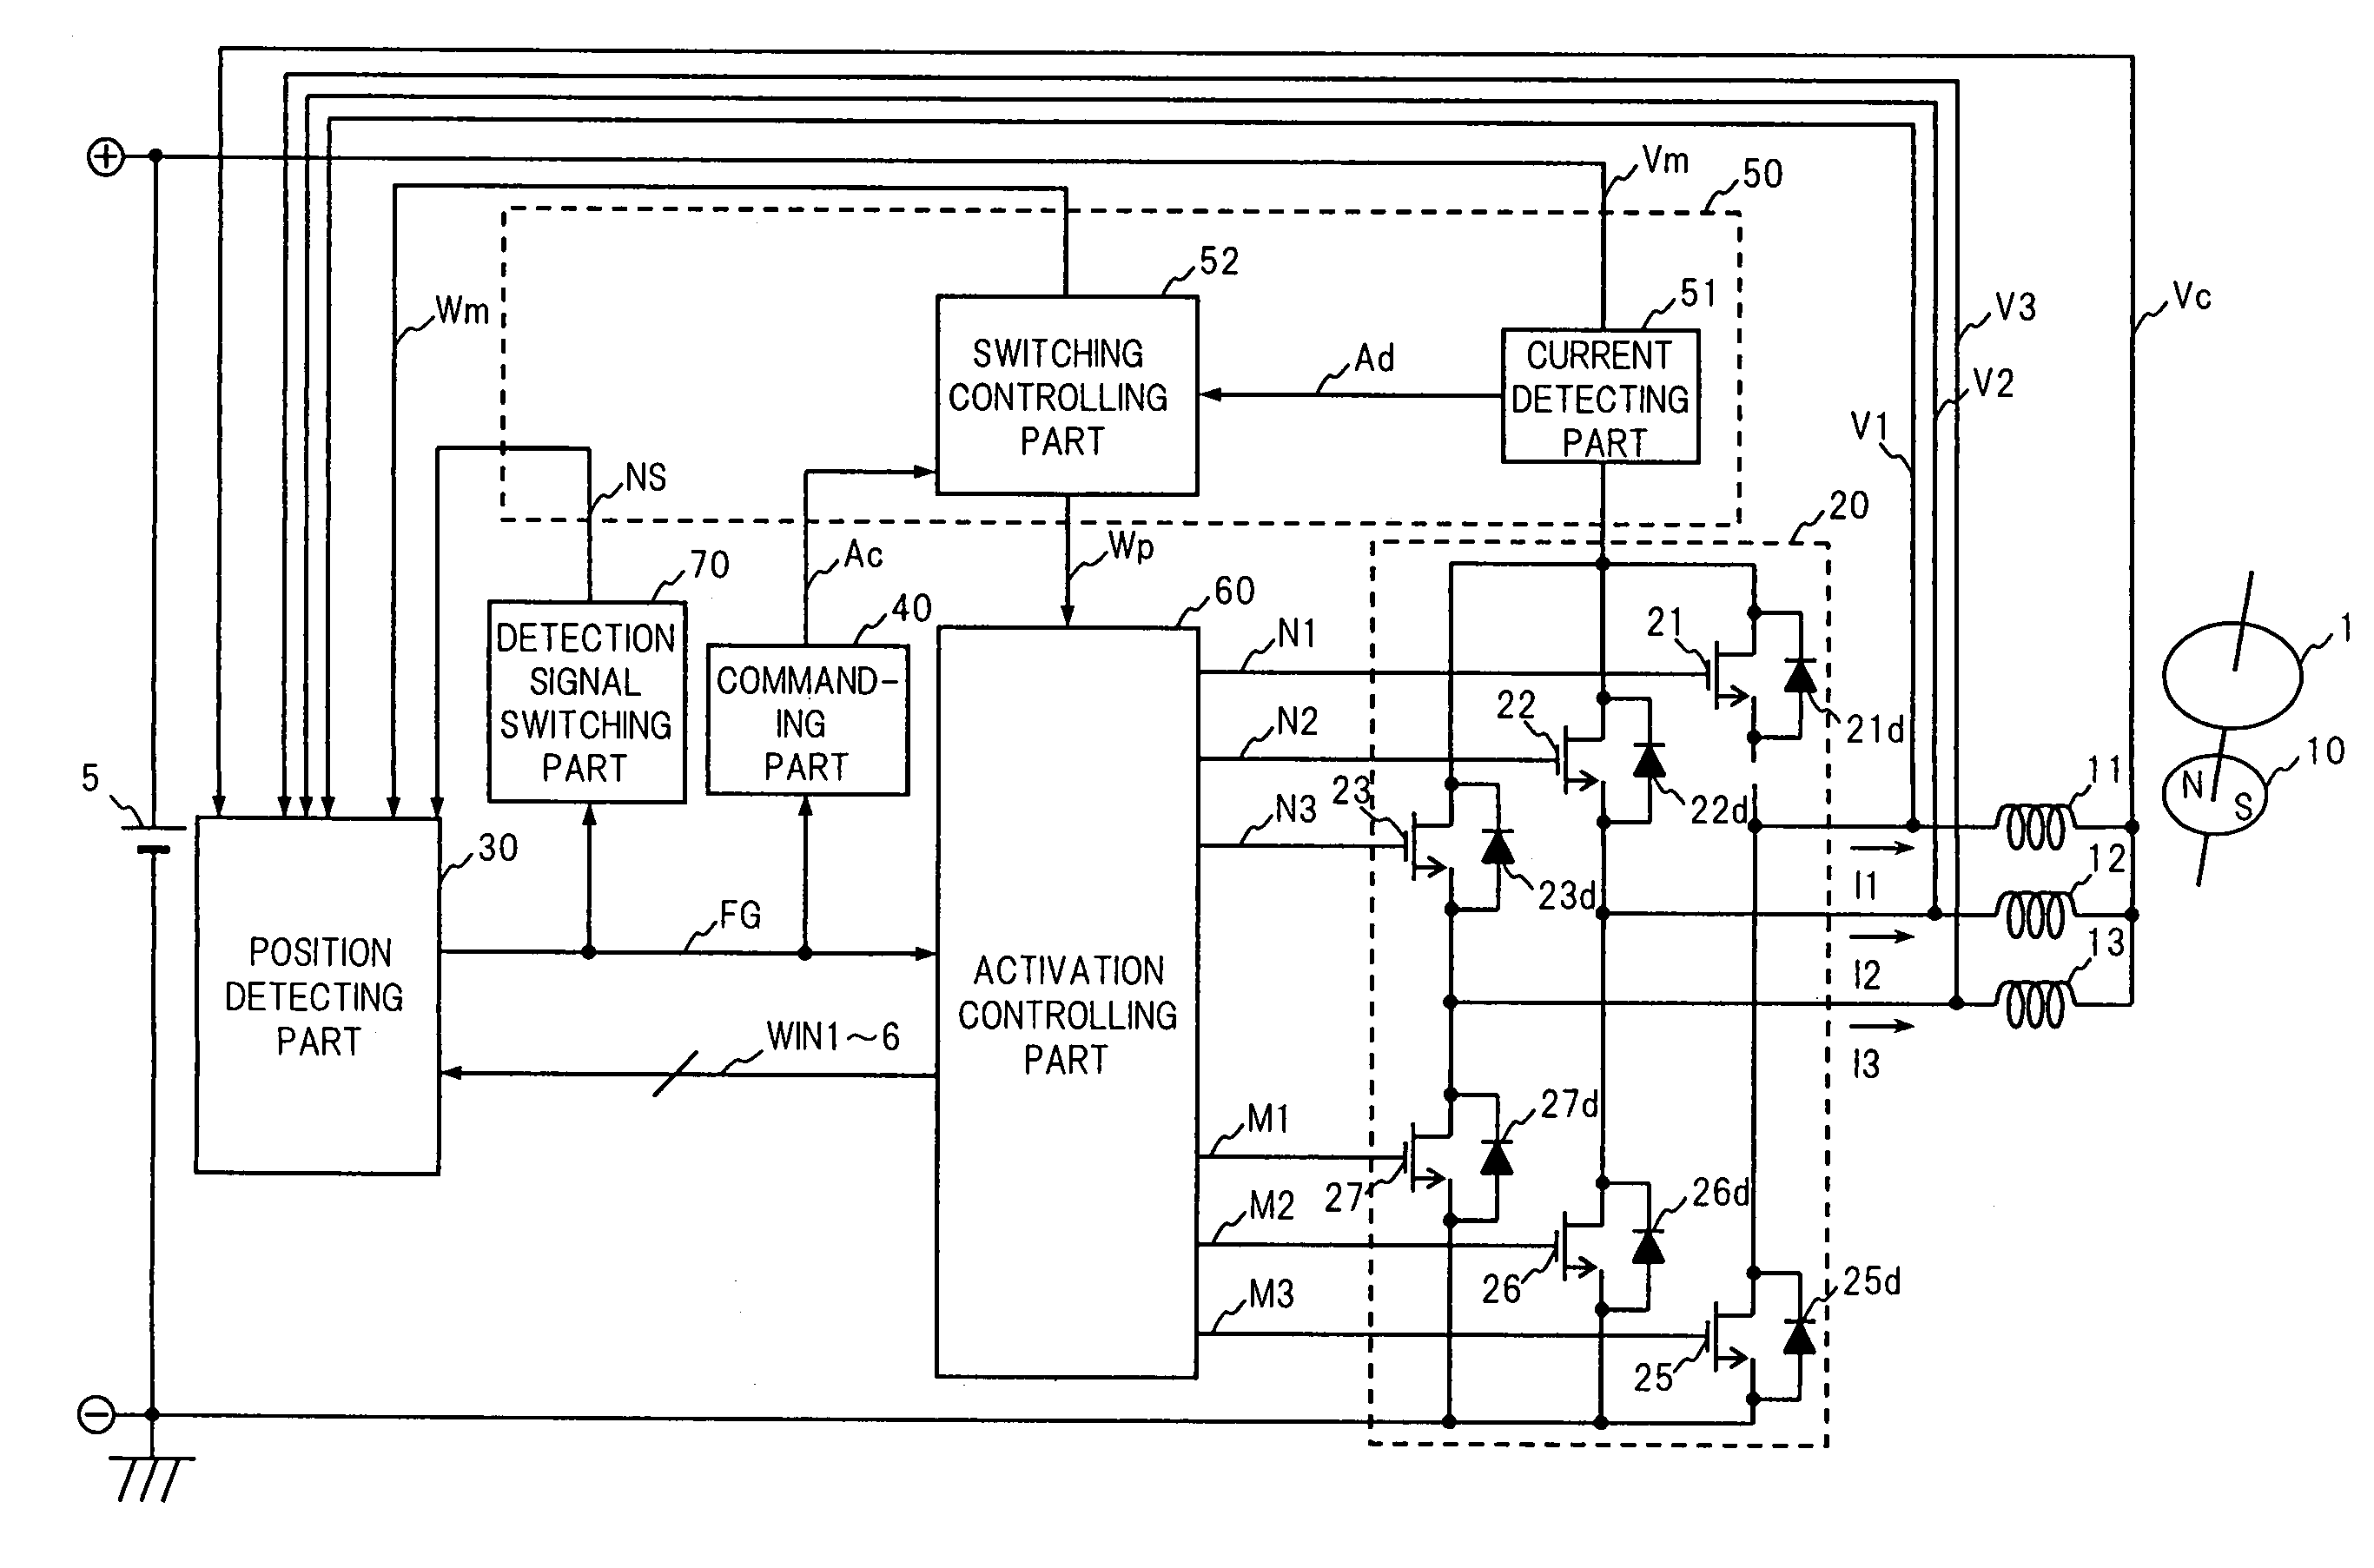 Motor and disk drive apparatus